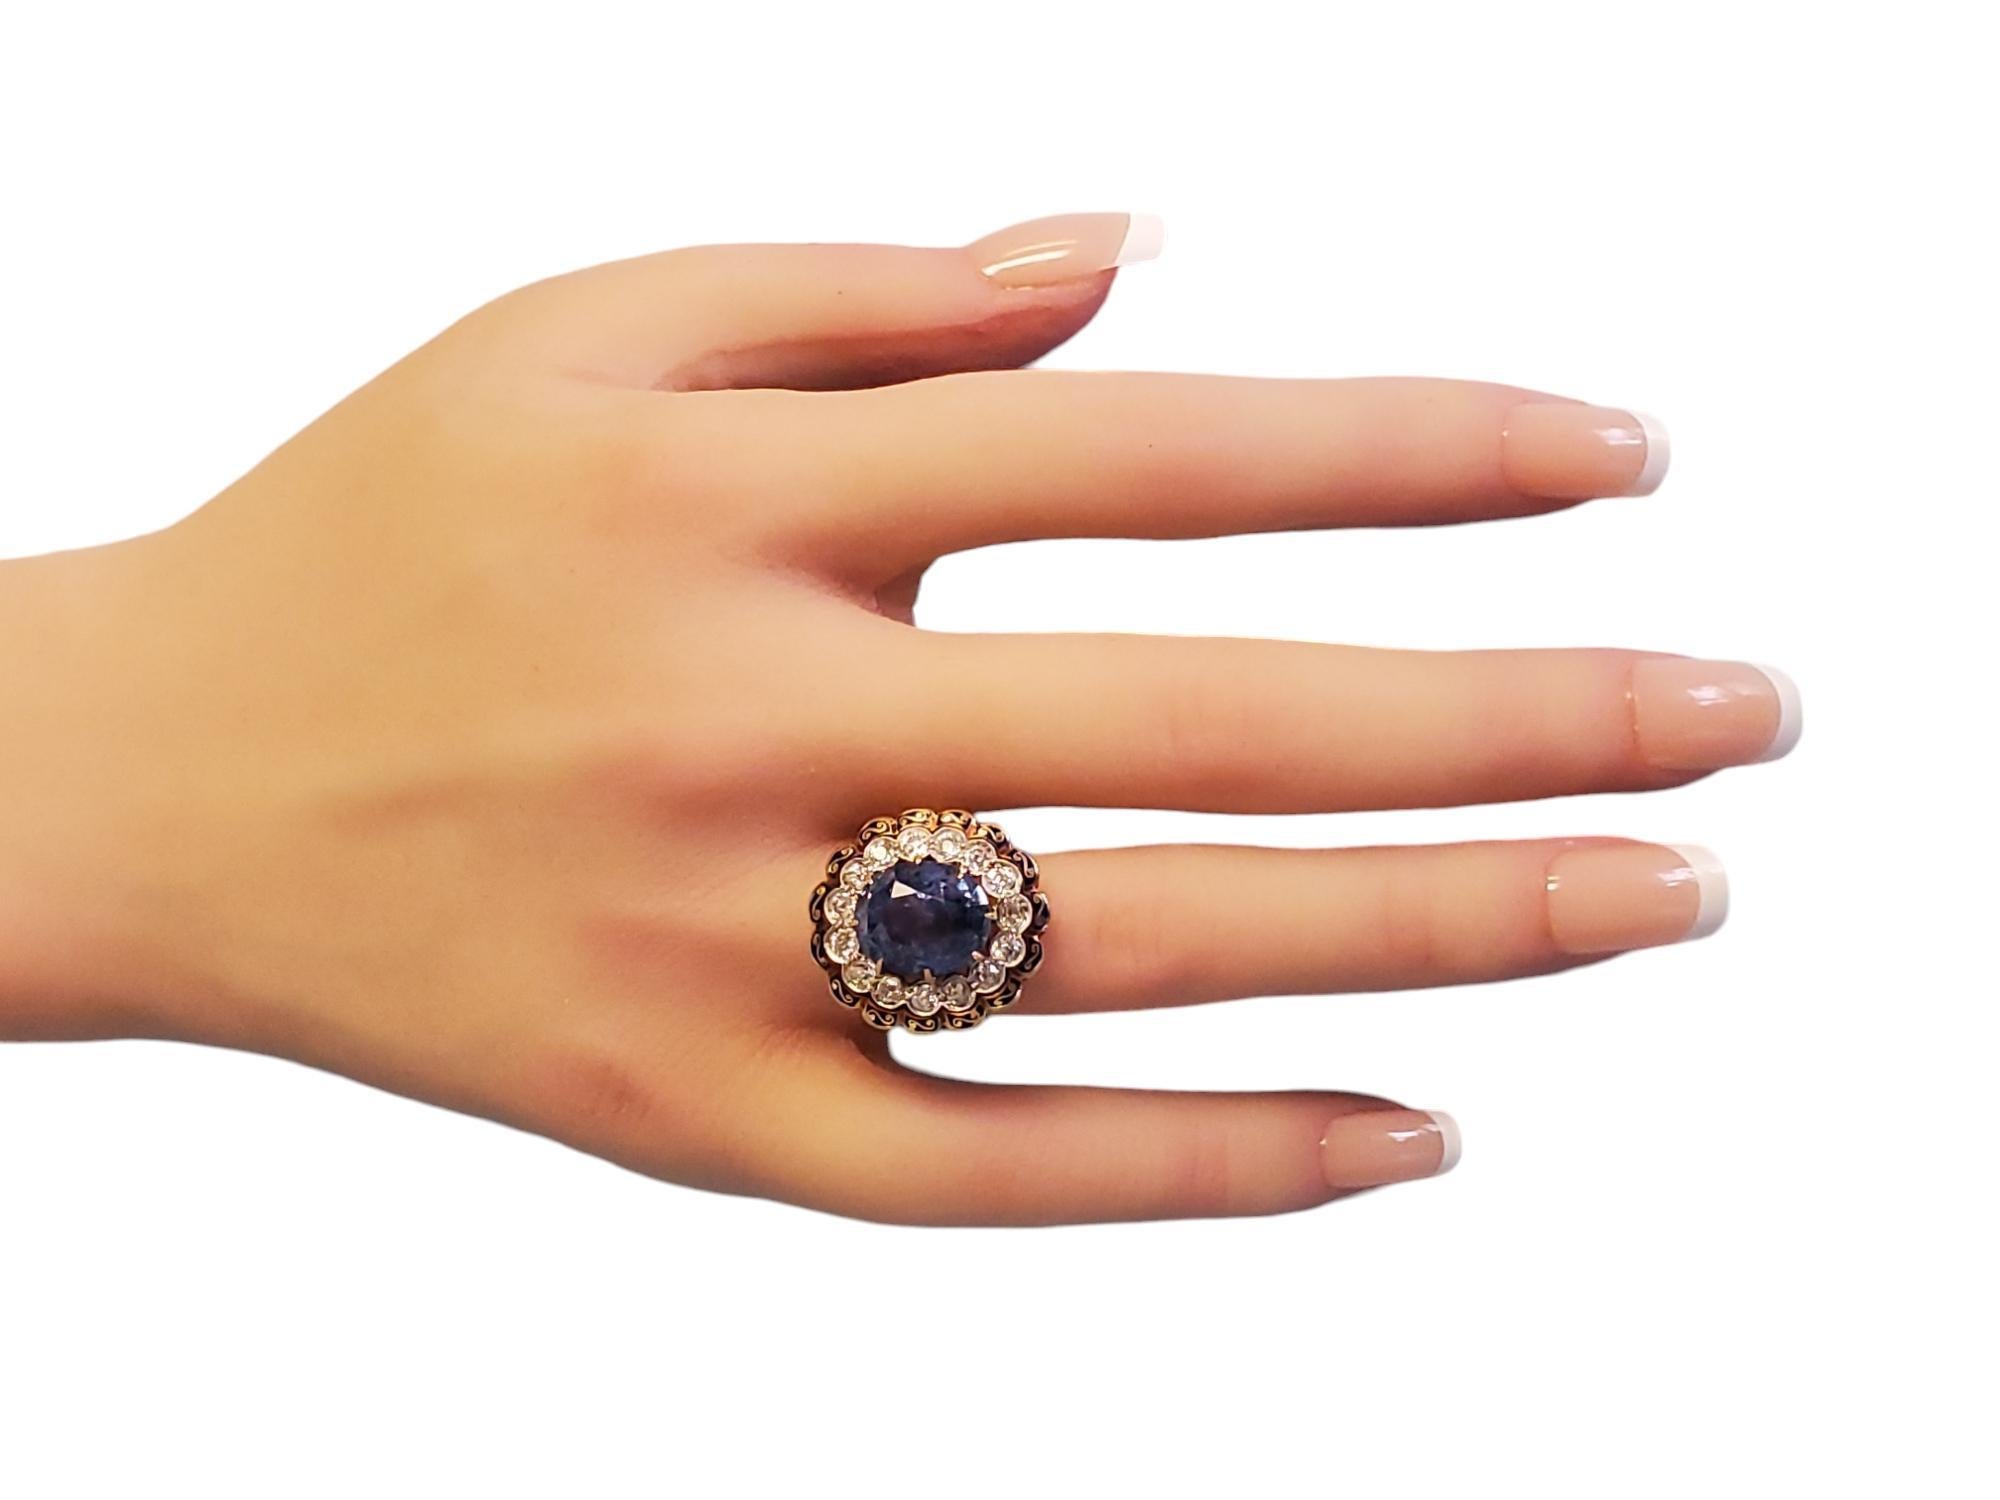 Listed is a spectacular Estate Antique Victorian oval sapphire ring. The center stone is 12.54x10.54 and weighs 9.19ct w/ Sri Lanka origin and no heat from GIA. A stone this large and blue without any heat treatment is rare. There are 15 white old